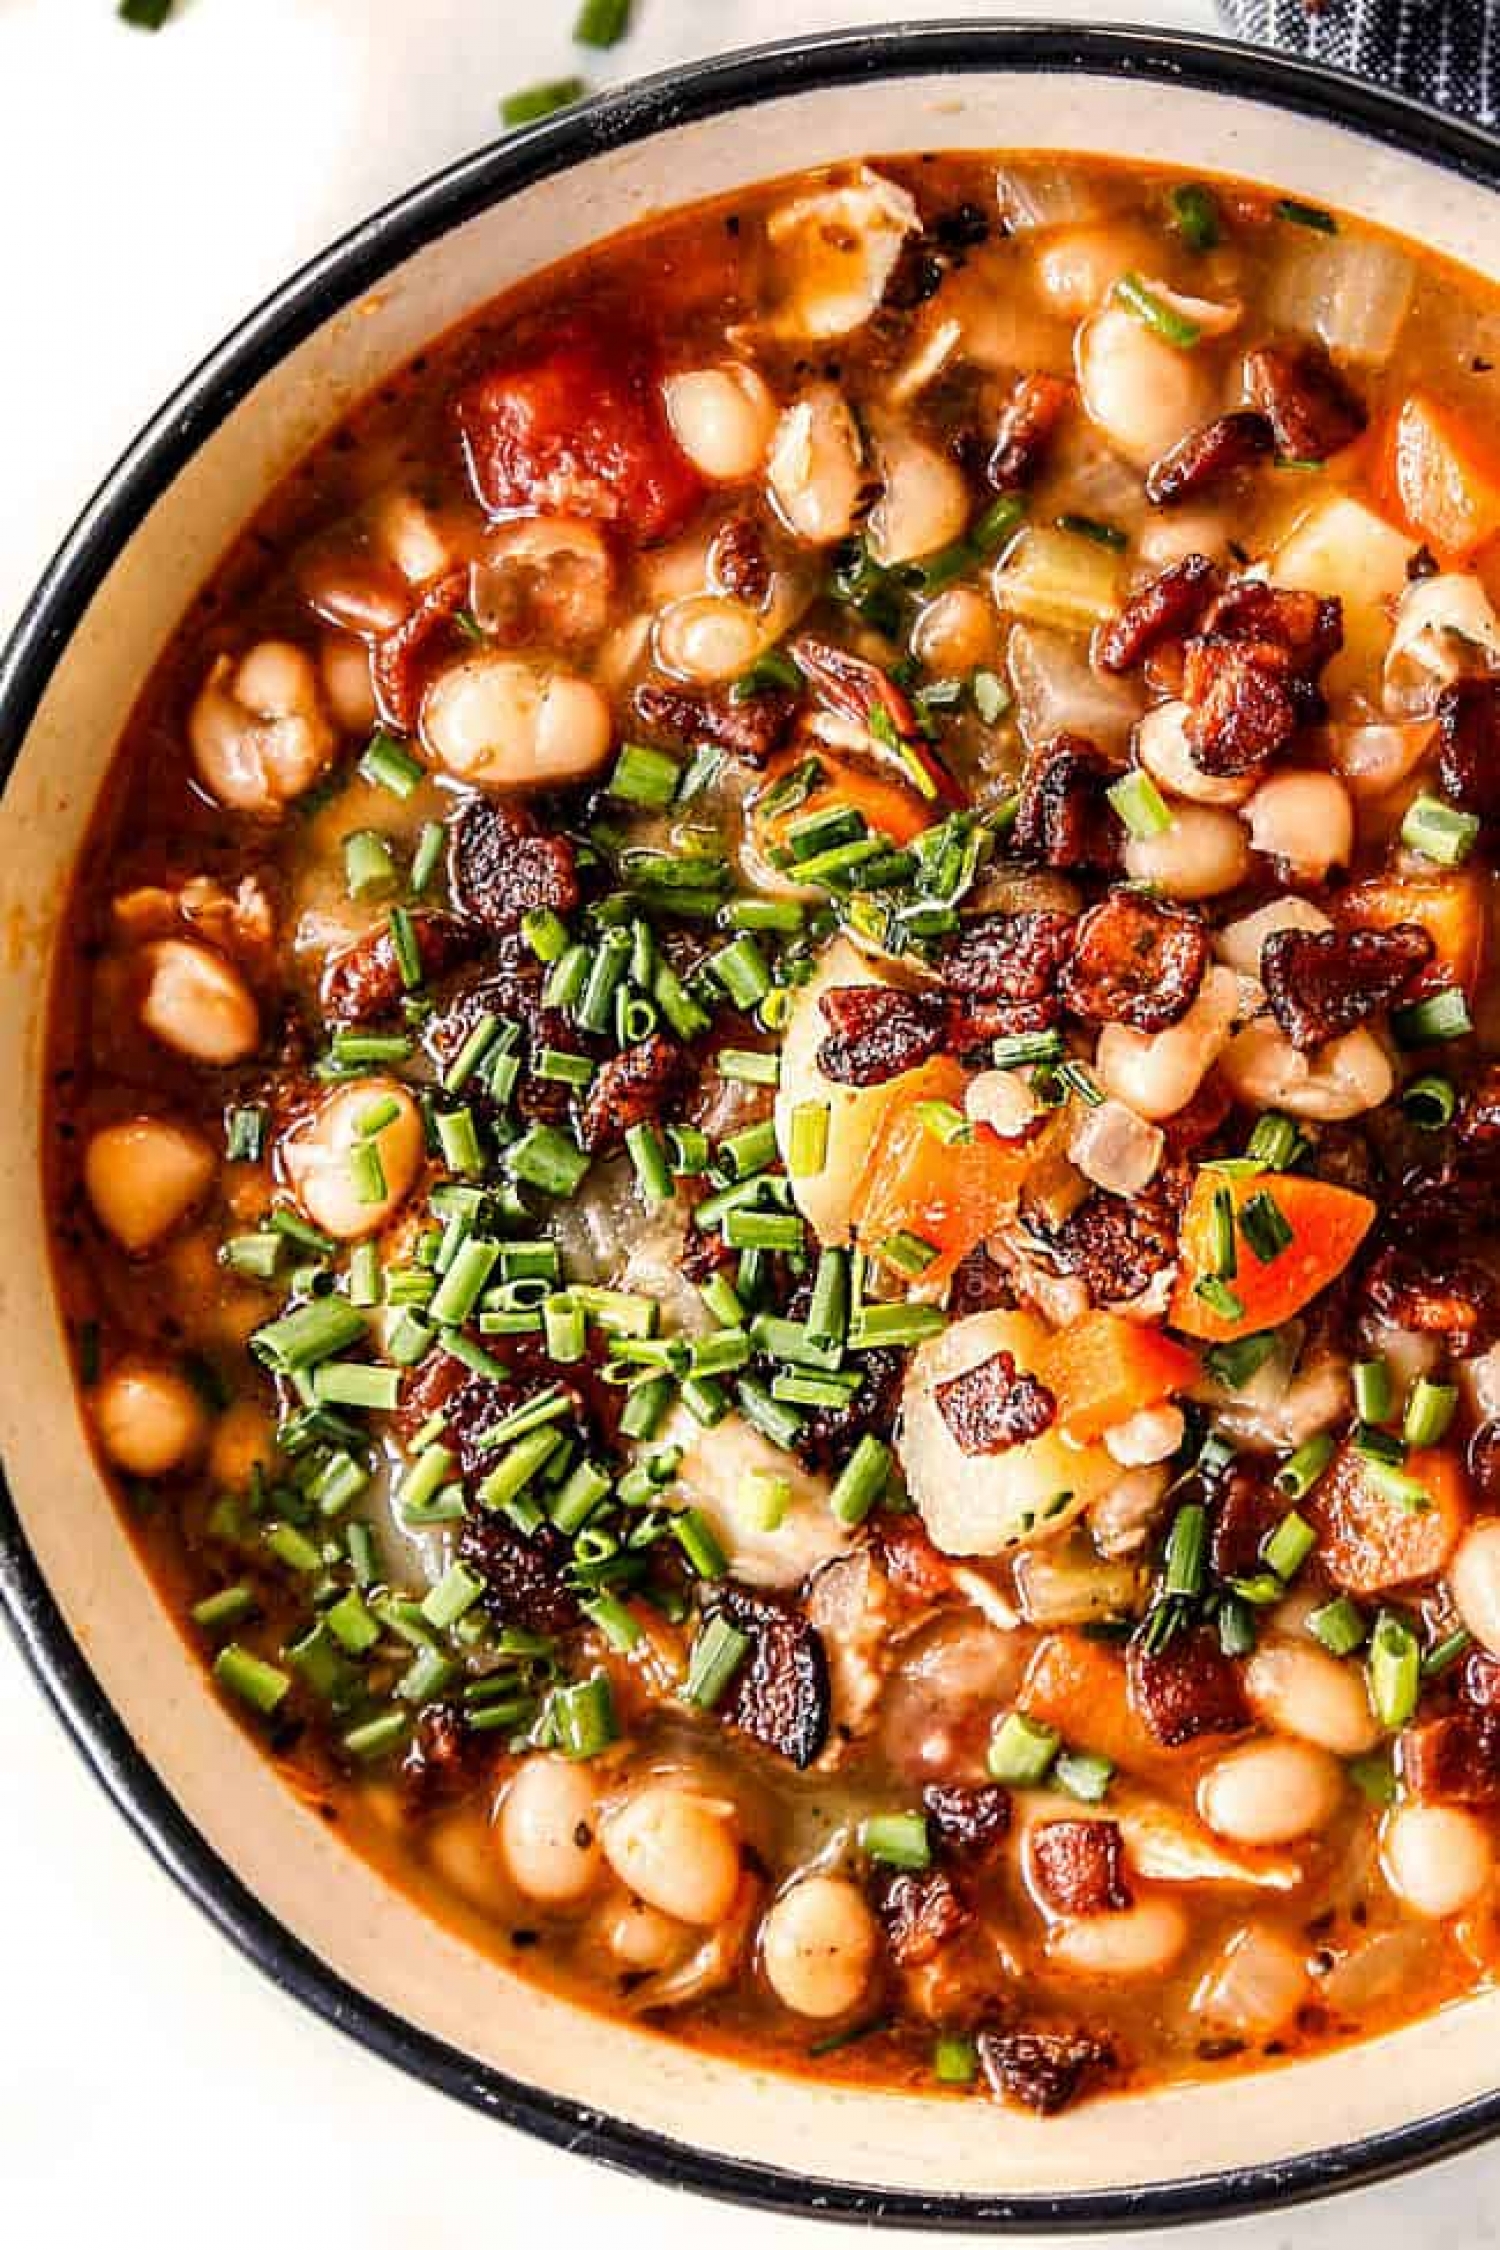 <p>For chillier evenings, this navy bean soup is the perfect cozy meal to tuck into, to warm you from the inside out. With tons of veggies, smoky bacon and your choice of ham or chicken, it's wonderfully versatile and totally satisfying. <a href="https://carlsbadcravings.com/navy-bean-soup/" rel="noopener">Get the recipe here.</a></p>